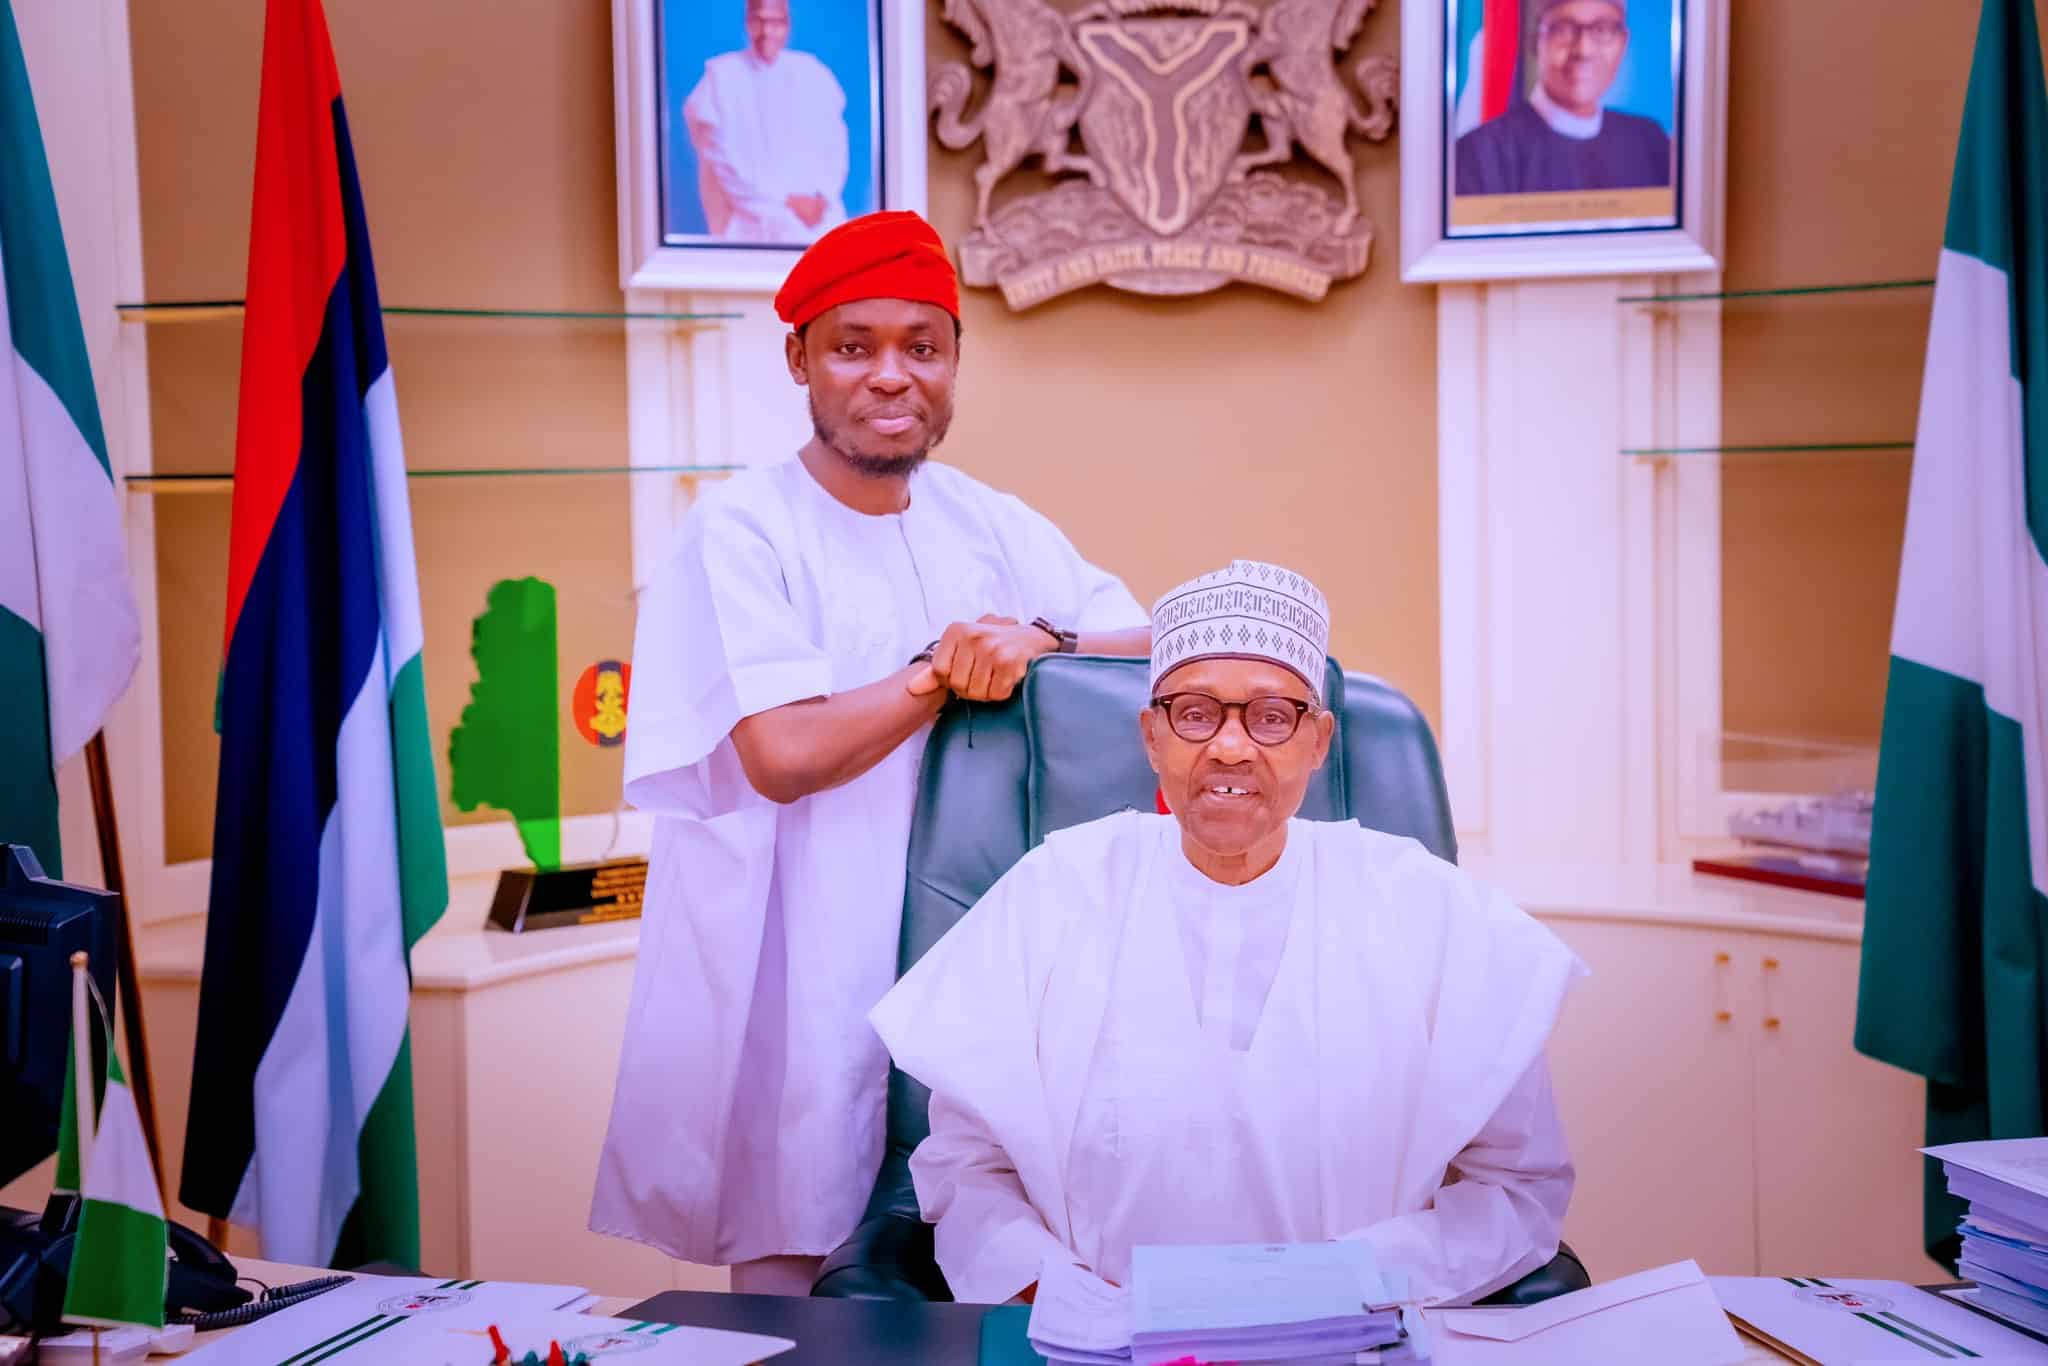 'For 8 Years, He Never Asked Me To Show Him His Pictures' - Bayo Omoboriowo Speaks On Working As Buhari's Official Photographer